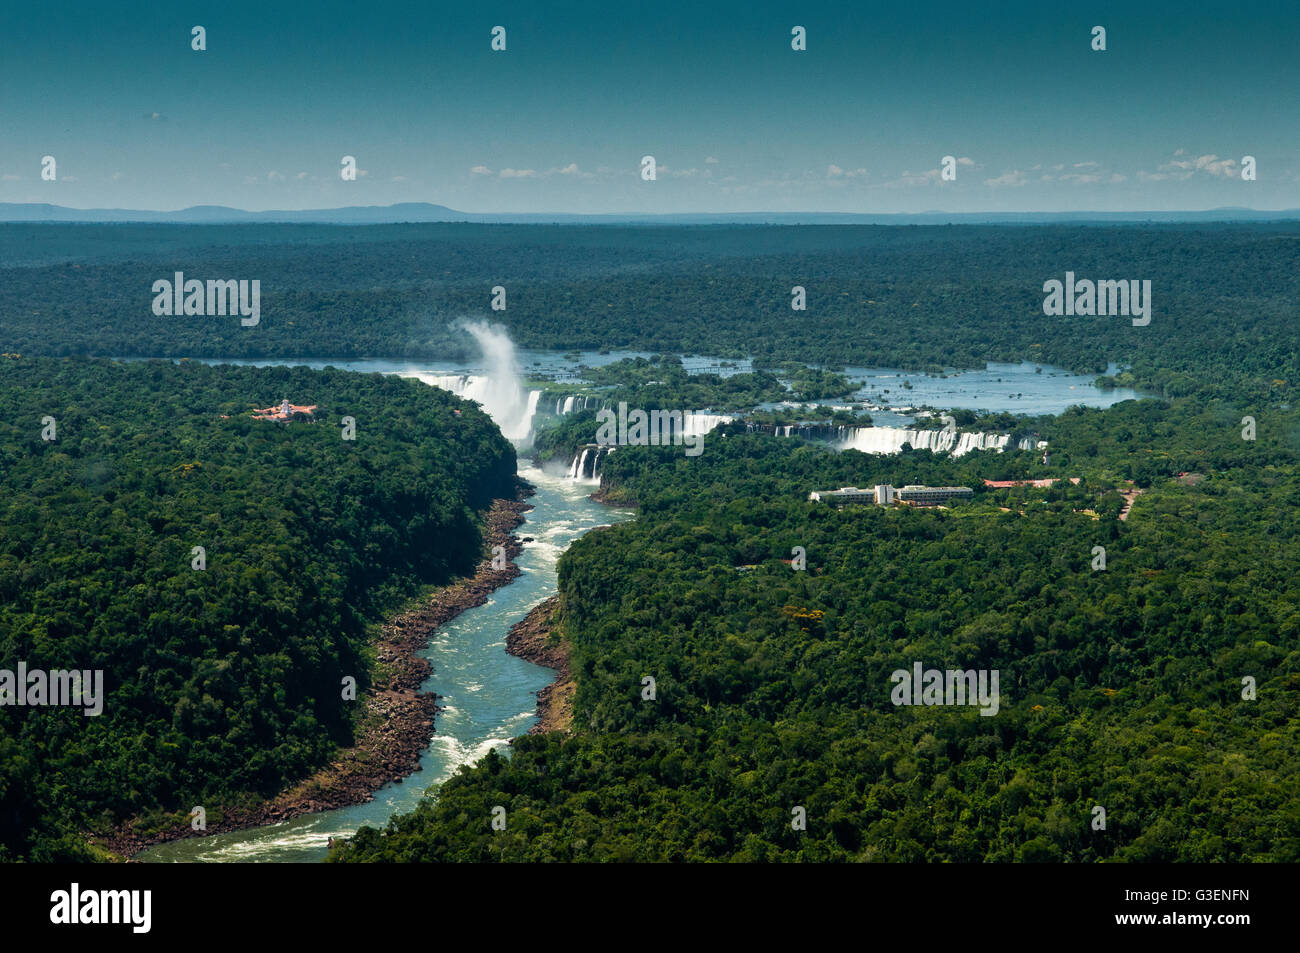 Iguazu Falls, Aerial Helicopter View Stock Photo